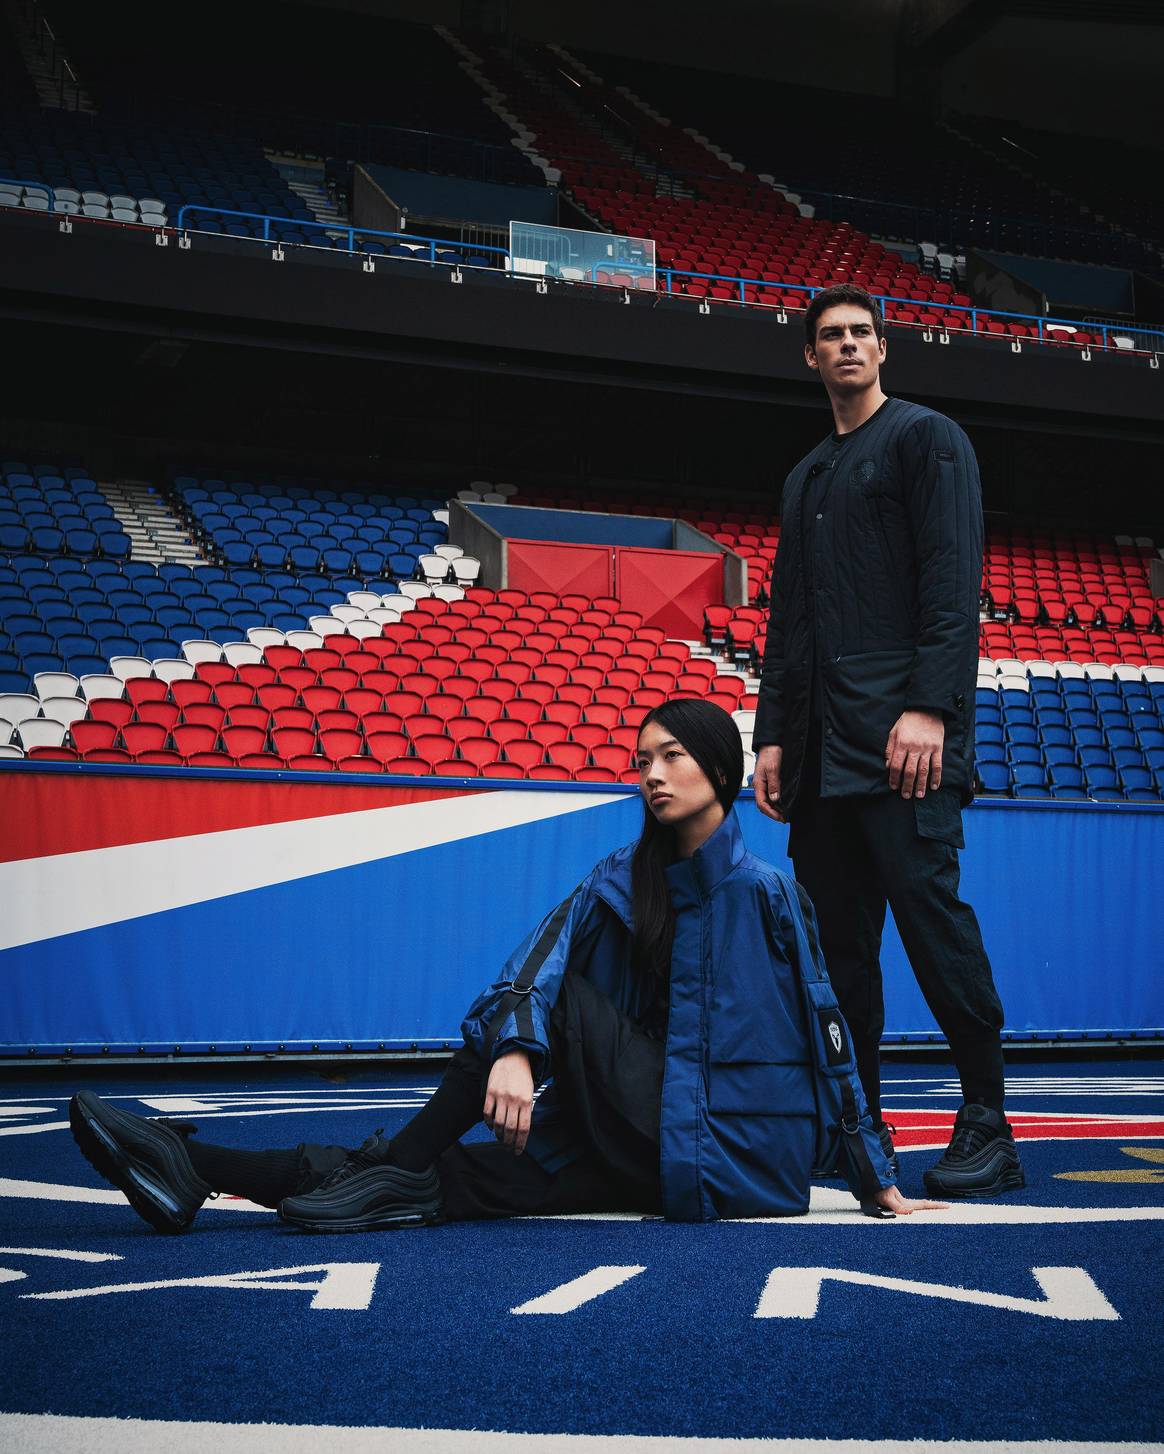 Paris Saint-Germain ‘Ace of Stade’ collaboration with Nobis and Jay Chou